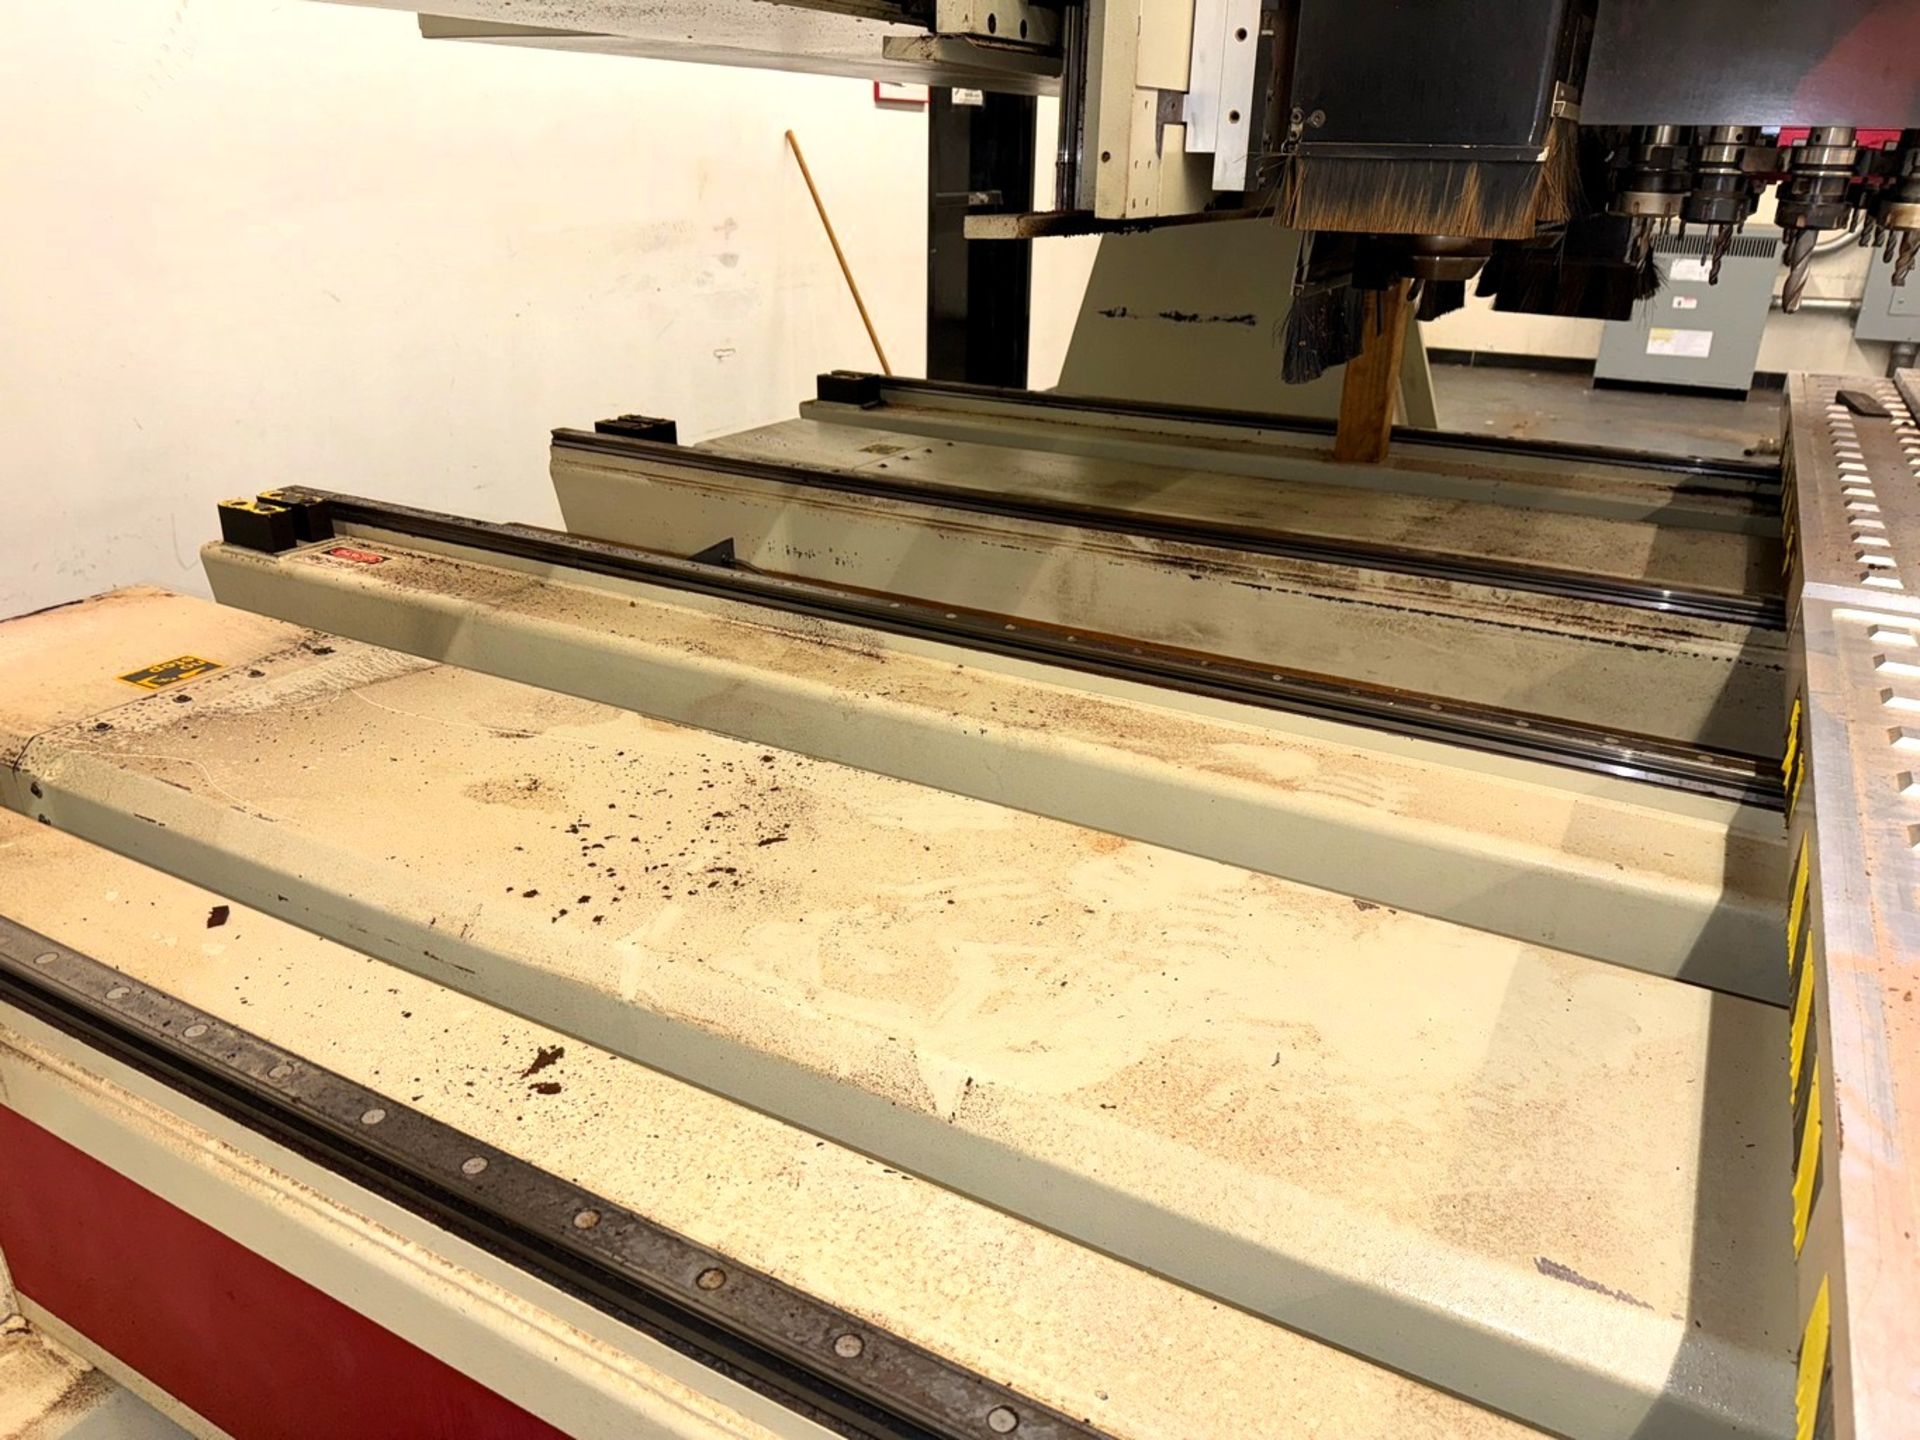 Komo Mach III VR-1005TT 3-Spindle CNC Router - Image 11 of 27